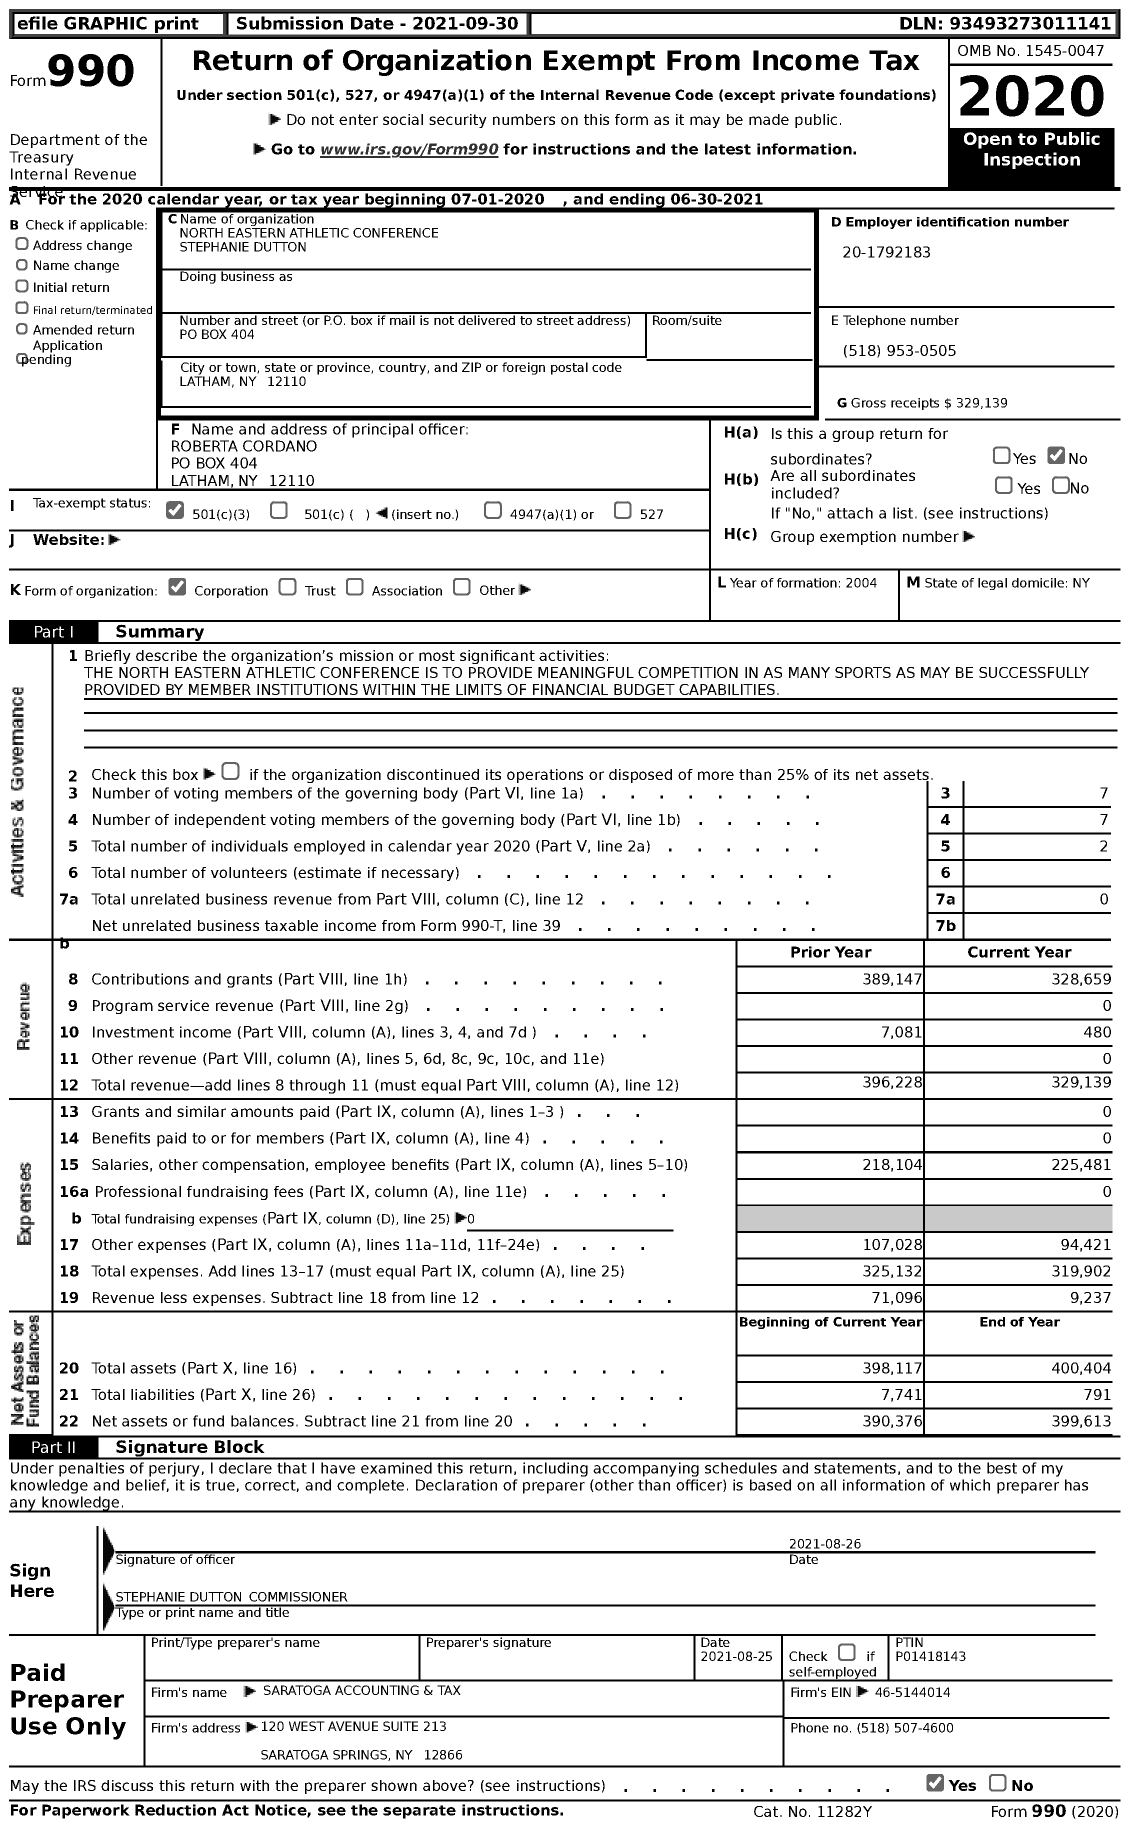 Image of first page of 2020 Form 990 for United Eastern Conference Stephanie Dutton